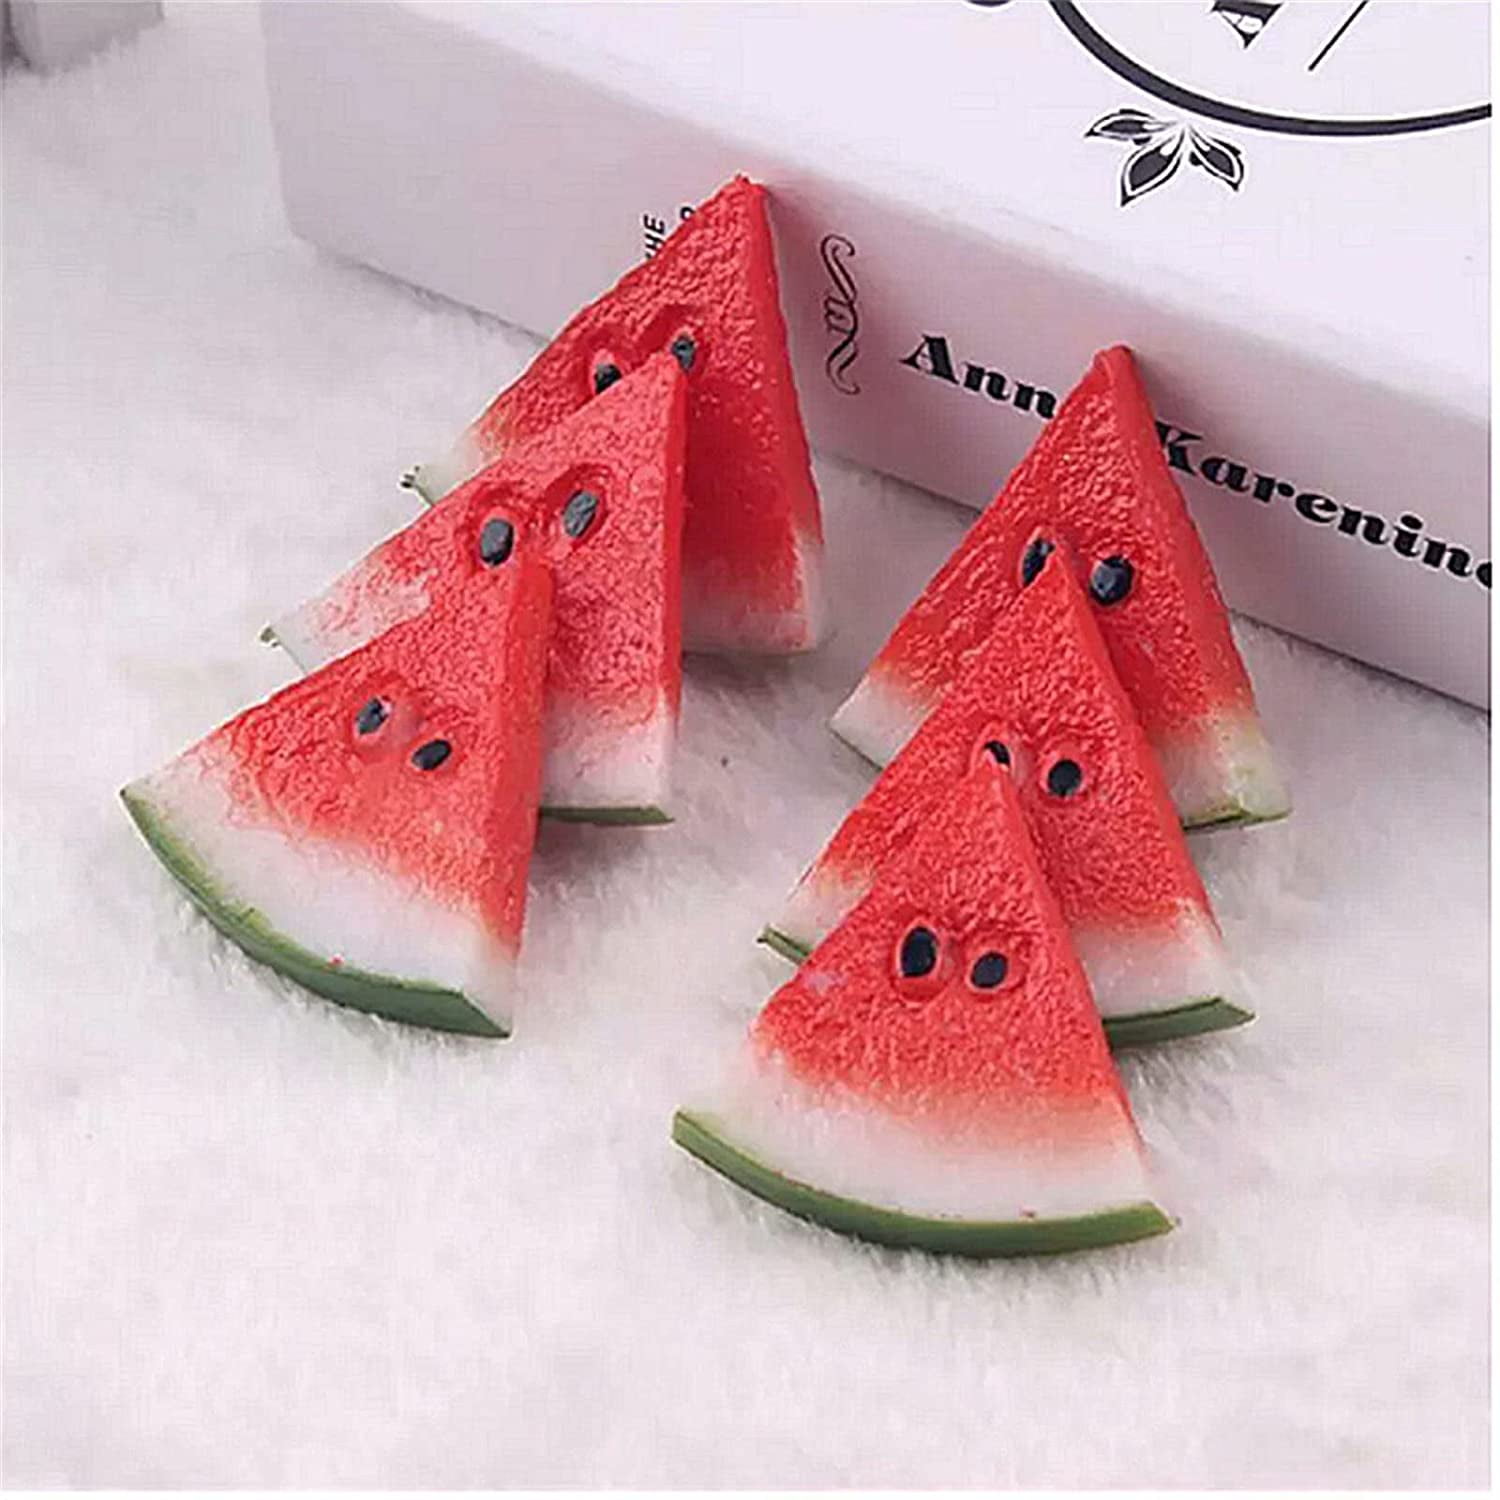 Set of 5 Artificial Small Watermelon Slices Home Office Decor Wedding Party DIY 